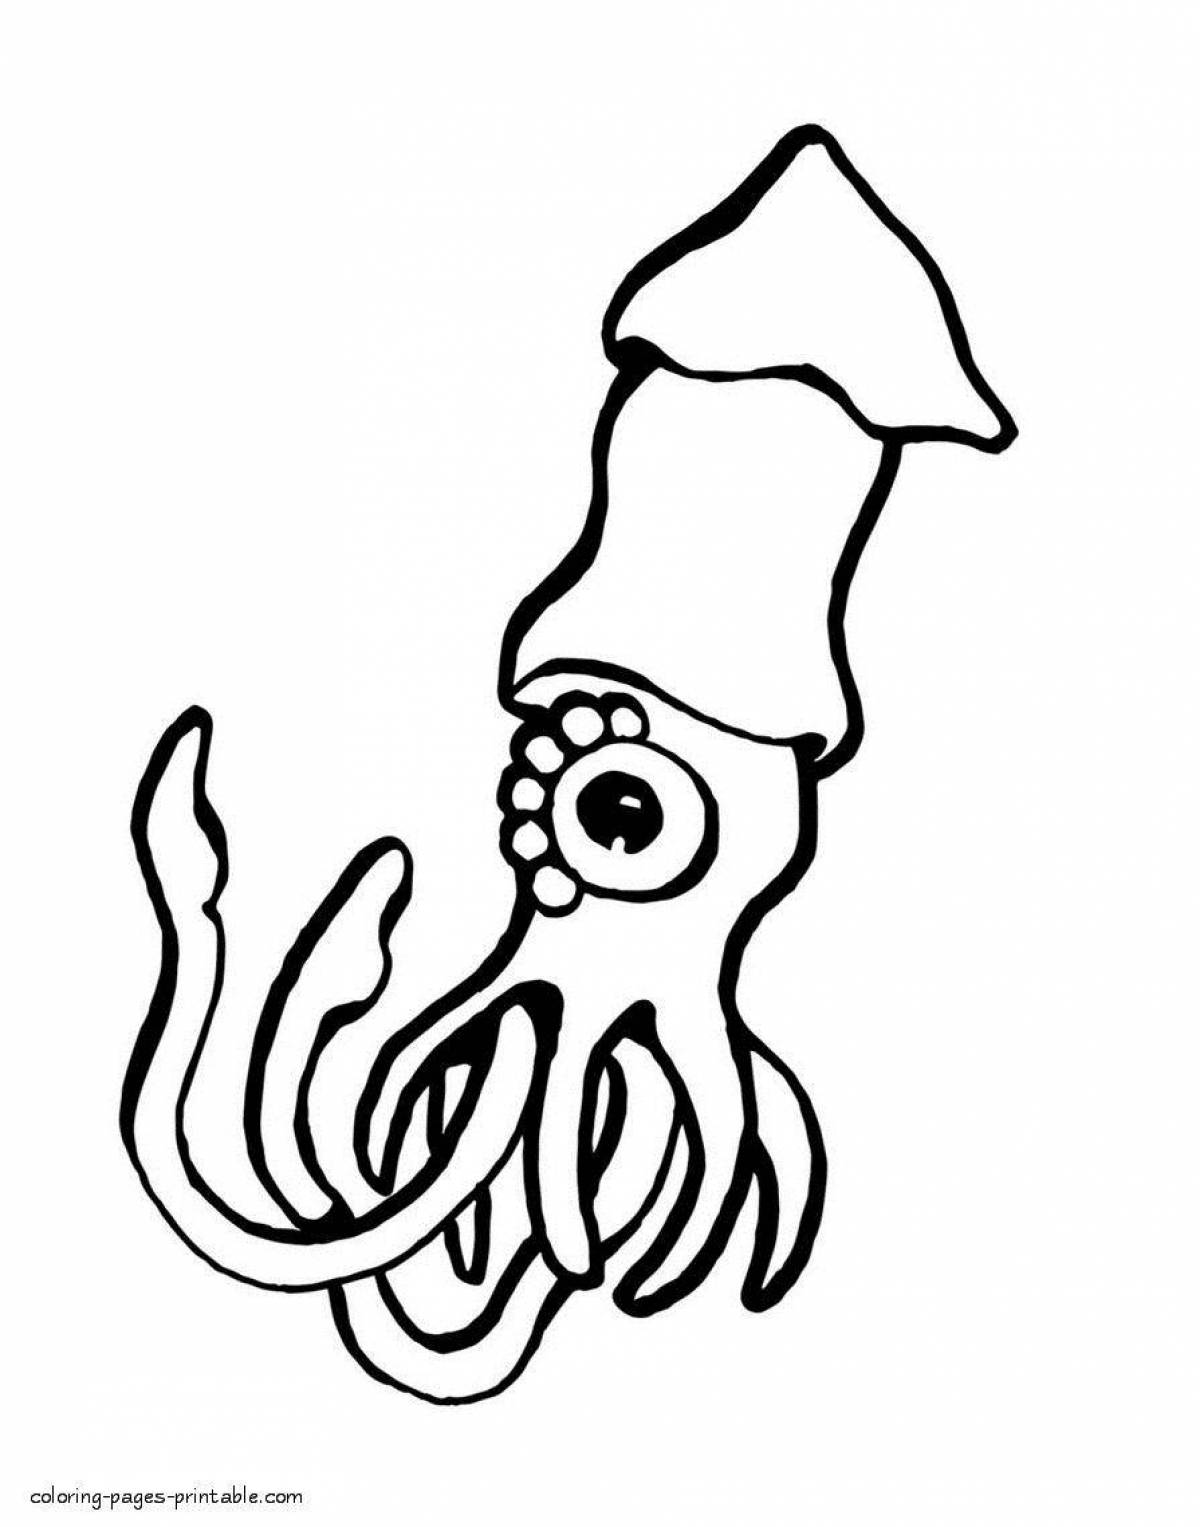 Coloring squid for kids